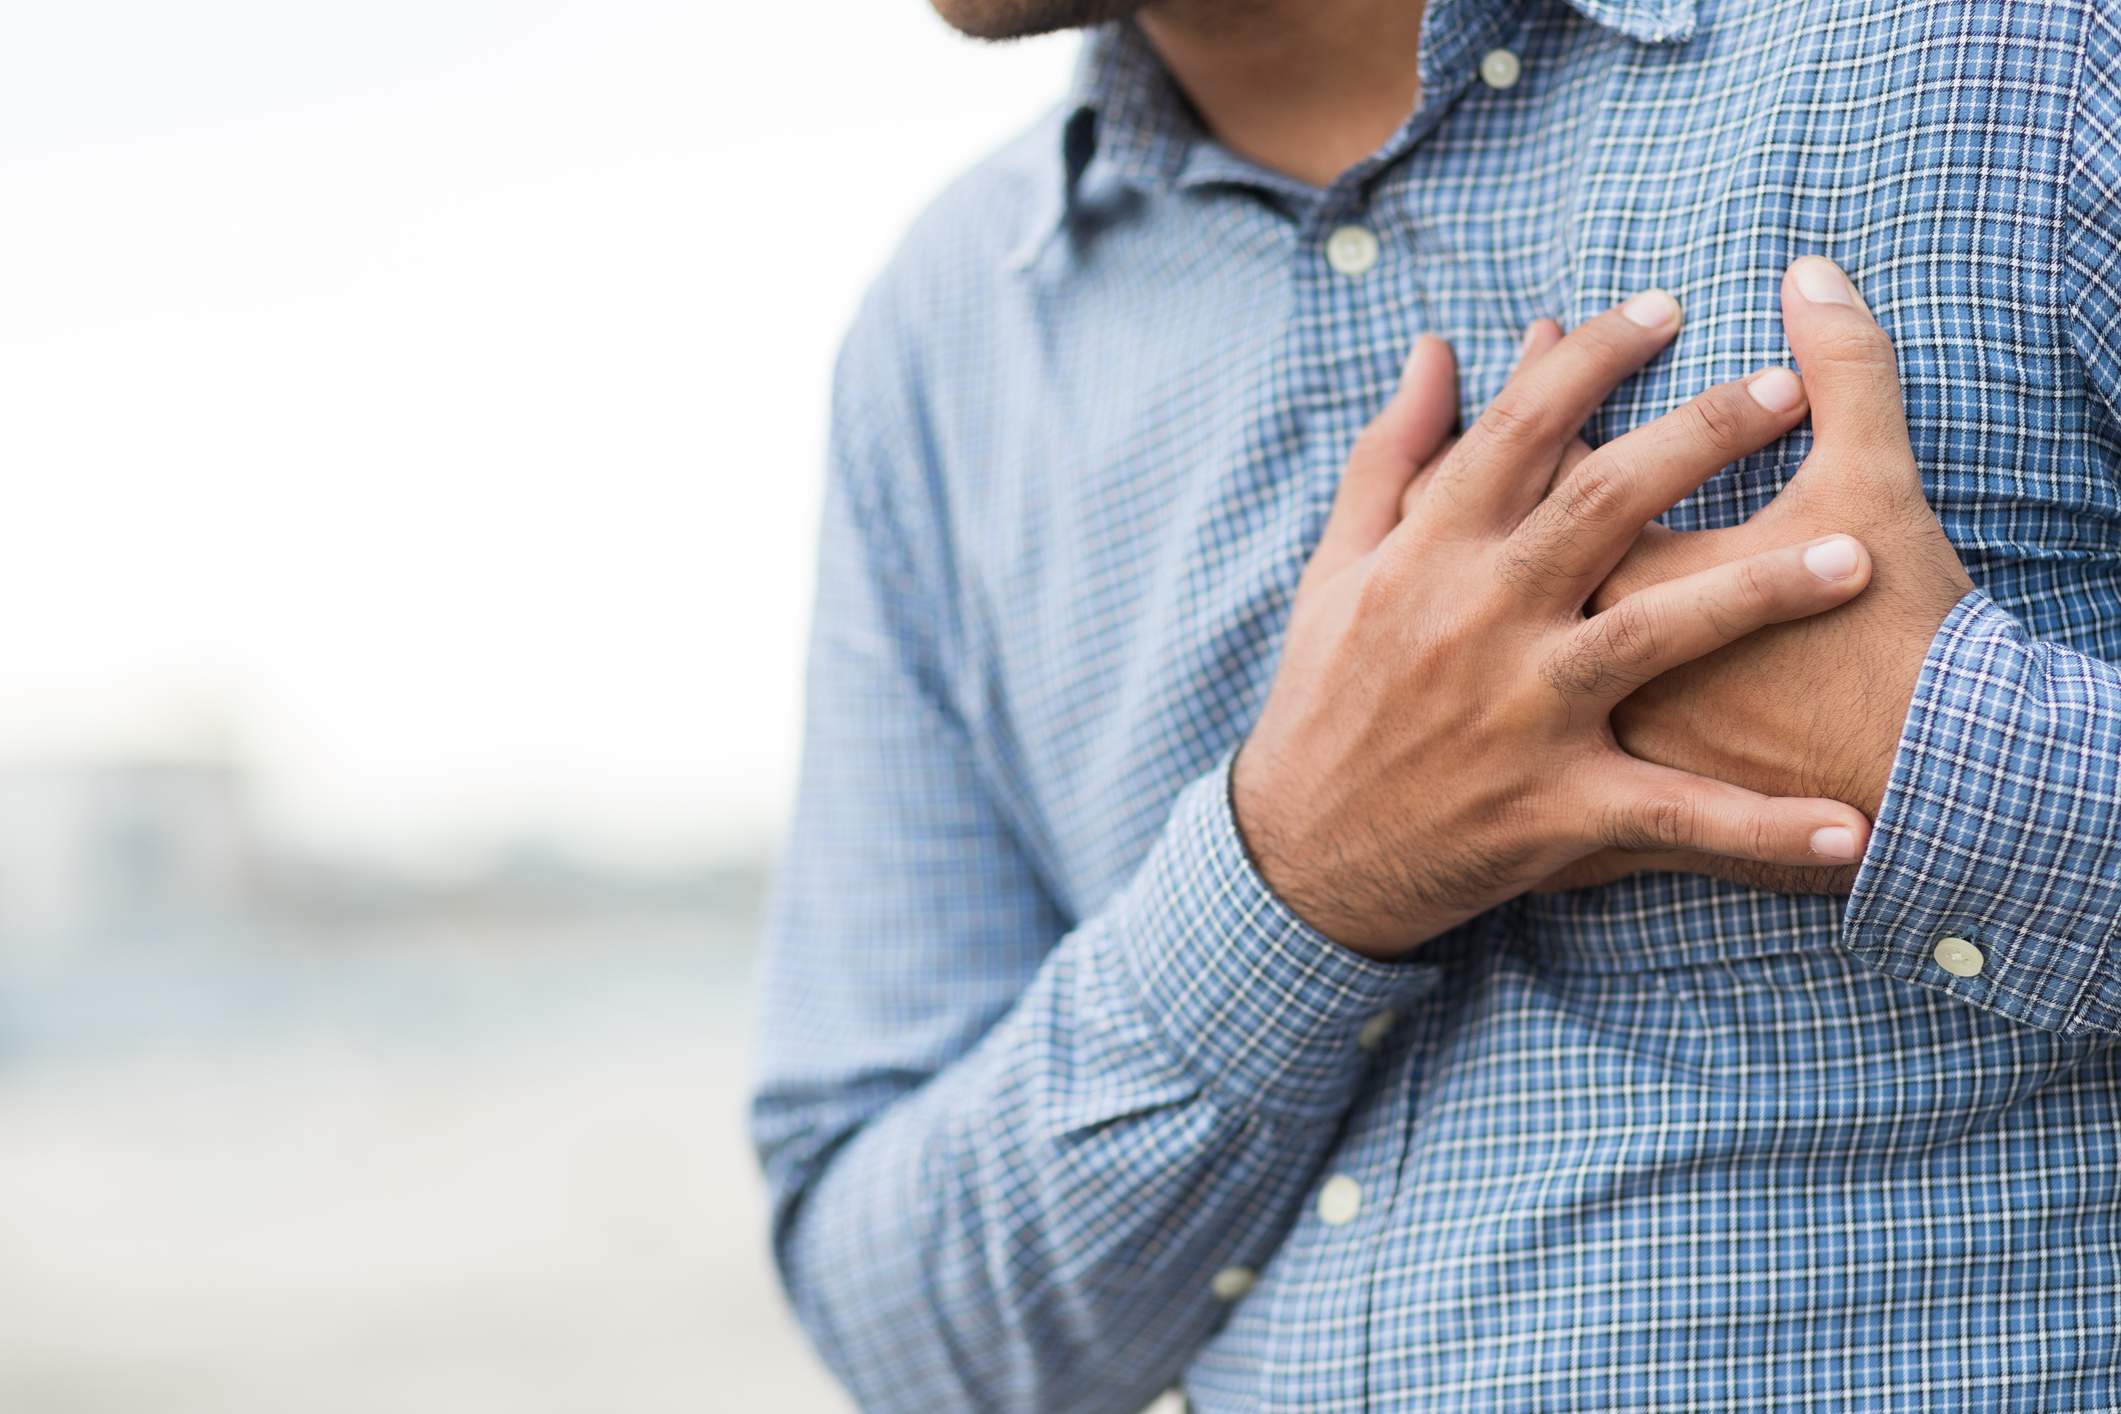 How your immune system and inflammation can lead to heart attack